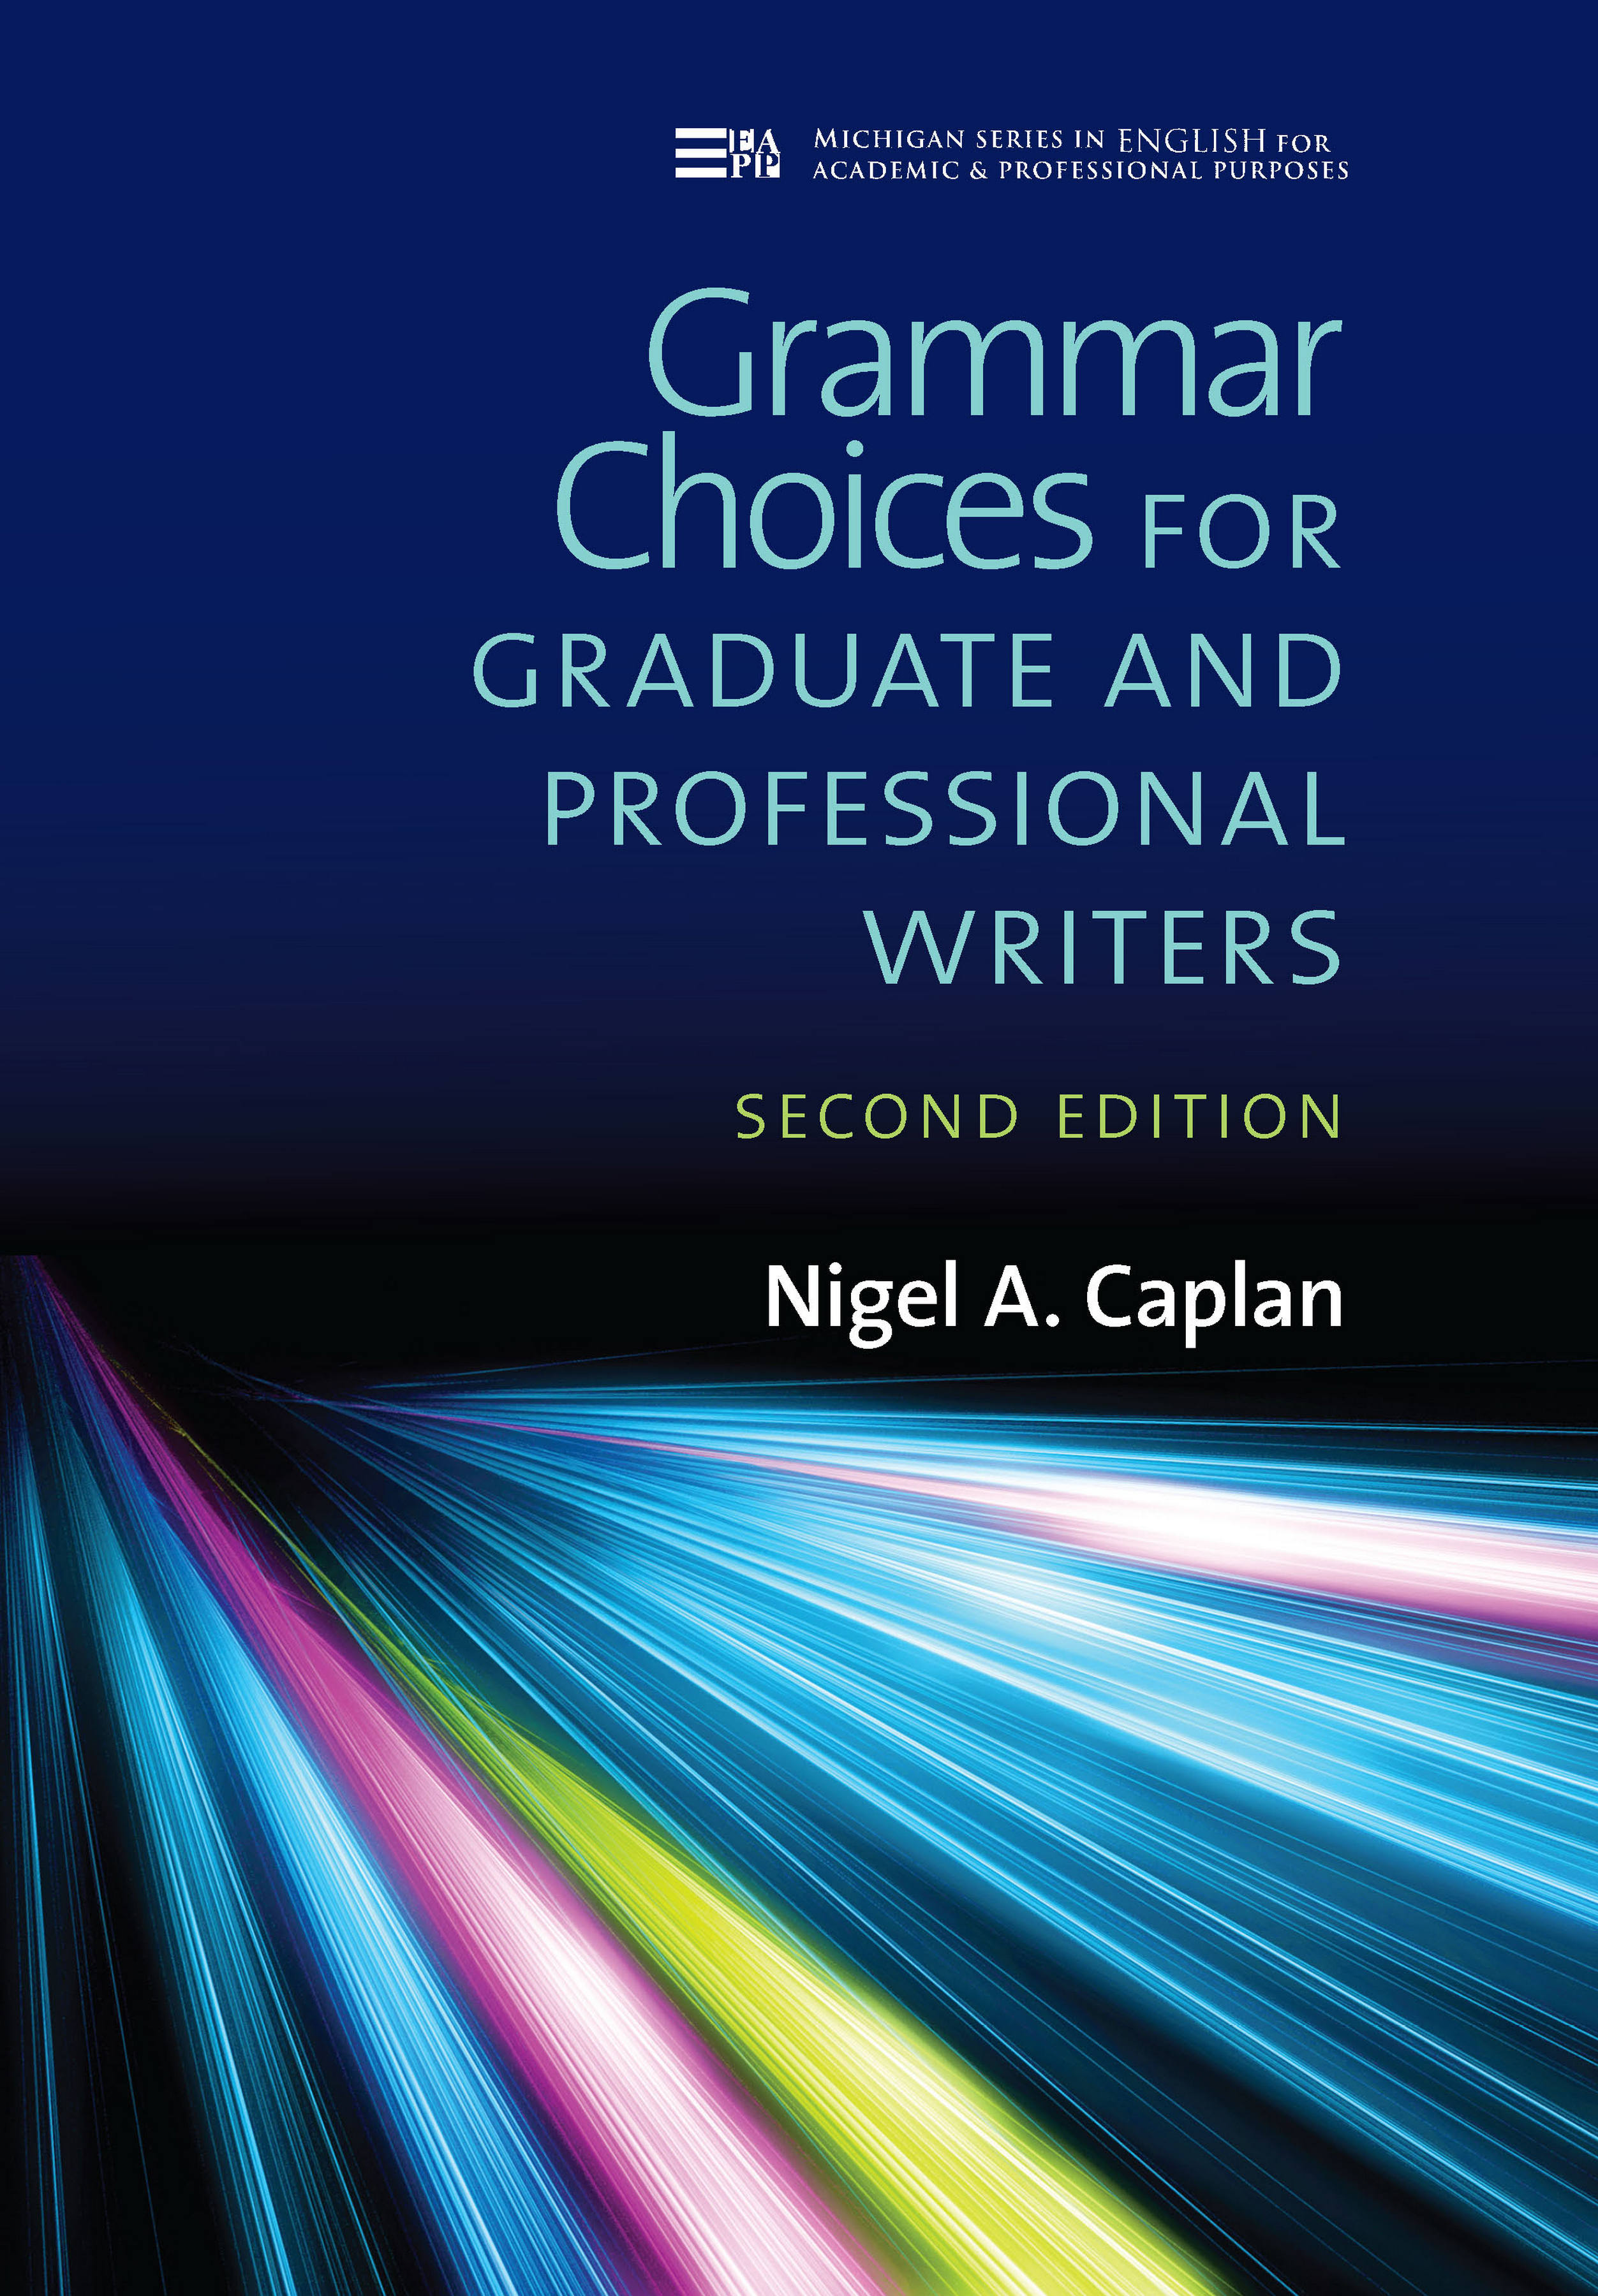 Grammar Choices for Graduate and Professional Writers, Second